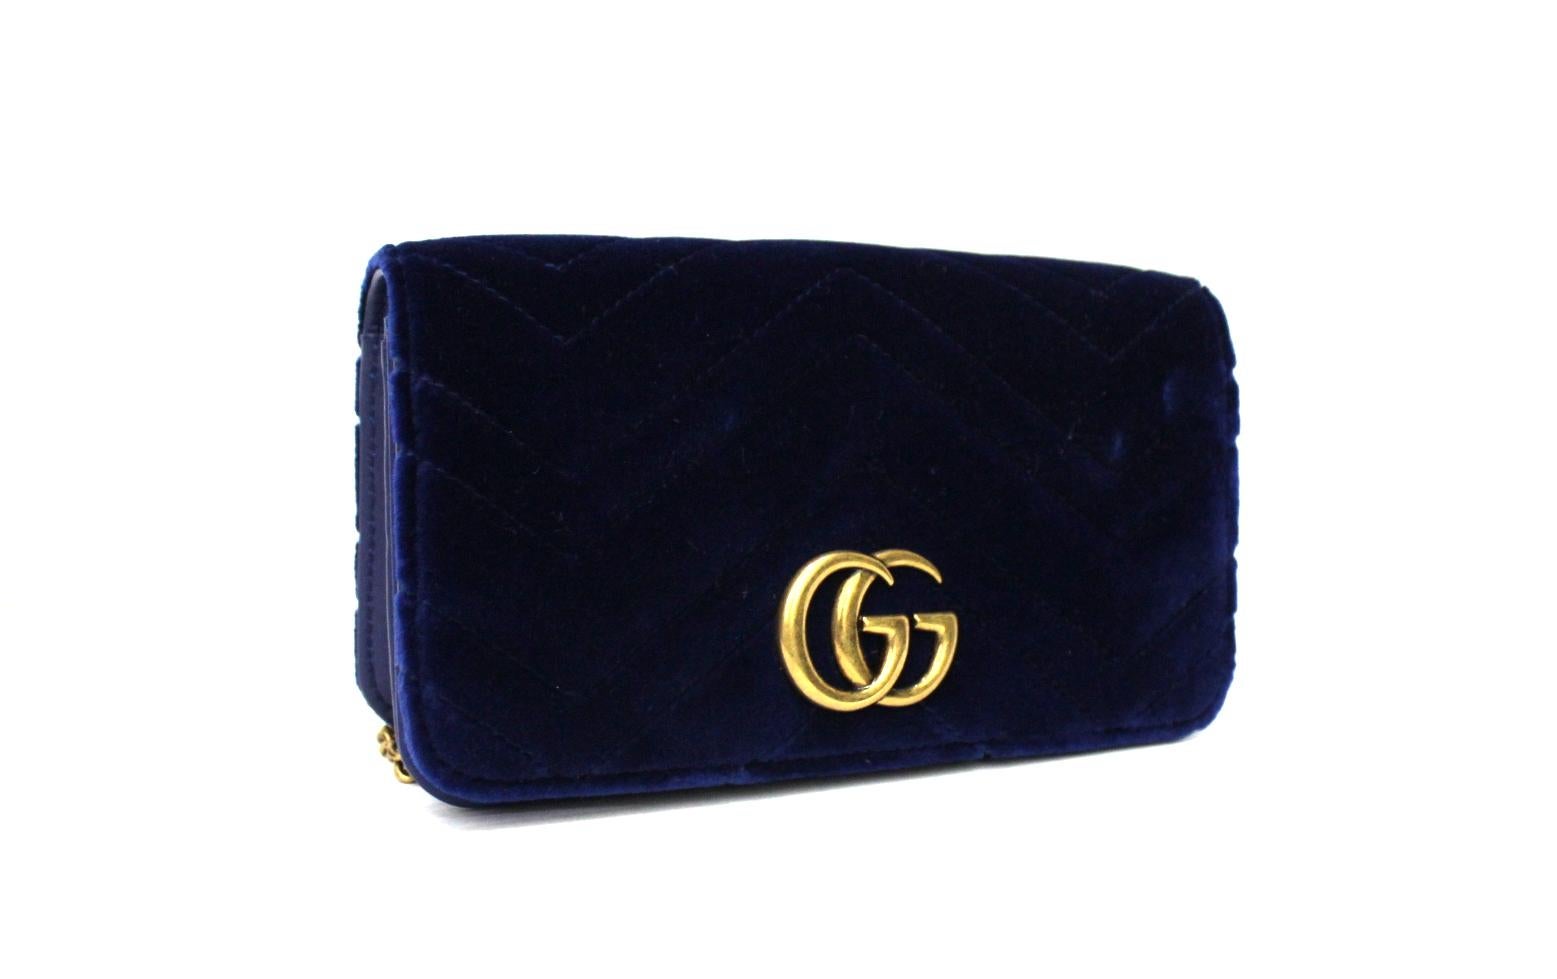 Fantastic Gucci Marmont clutch bag made of velvet in a beautiful shade of blue contrasting with golden hardware.

Equipped with magnetic flap closure, internally not very large. Equipped with chain shoulder strap.

The bag is in impeccable